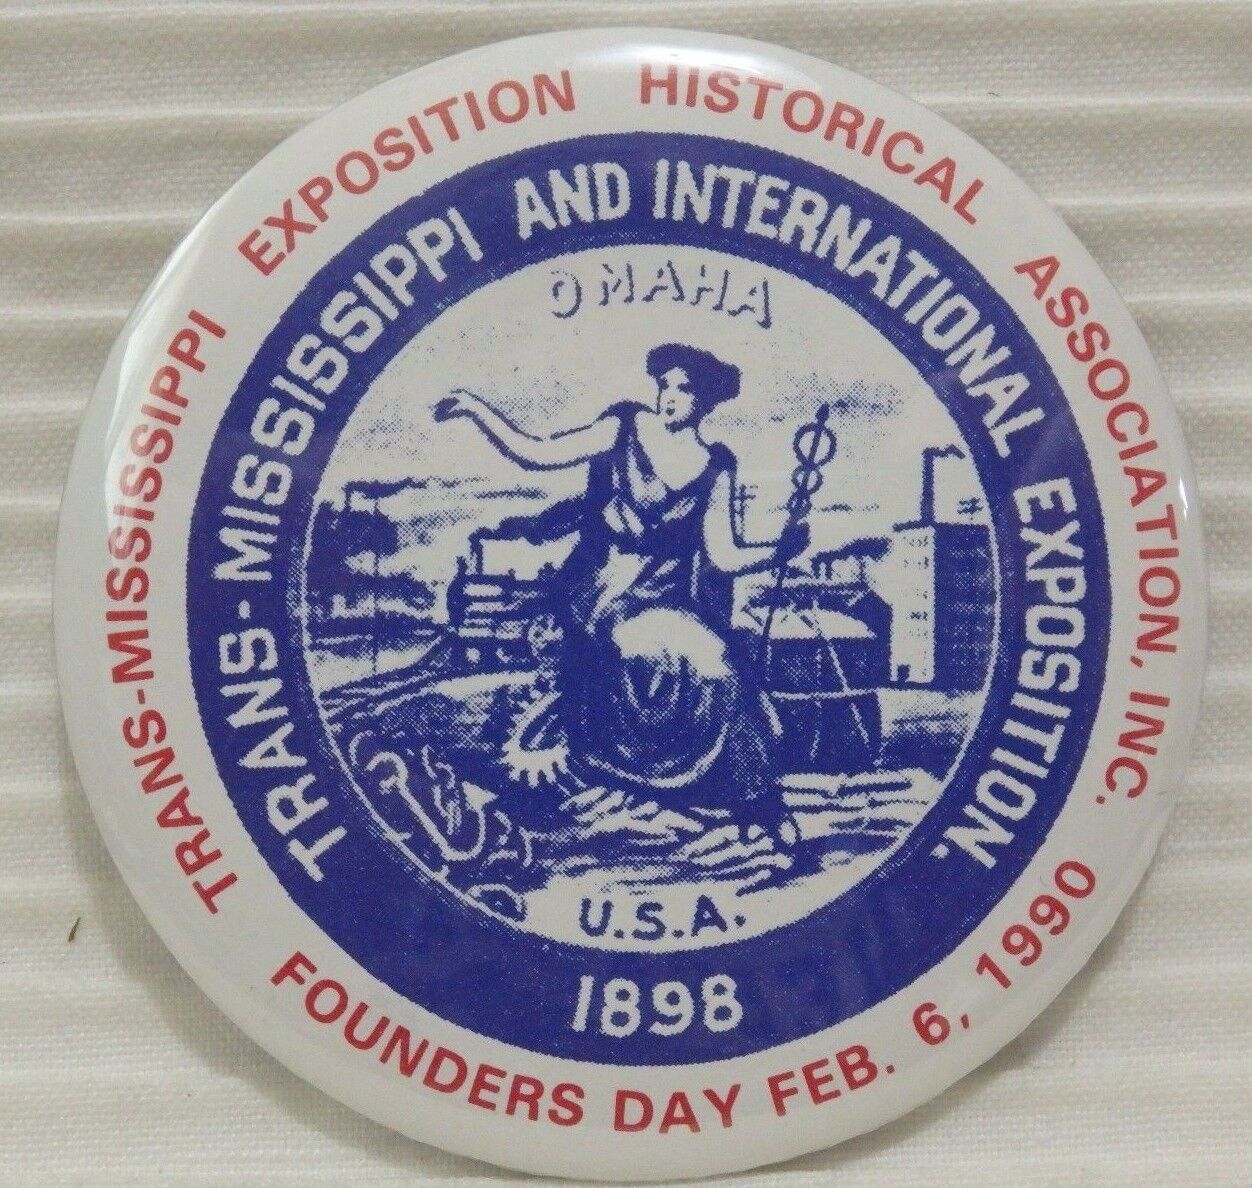 1990 Omaha Trans-Mississippi International Exposition Founders Day Button 1898